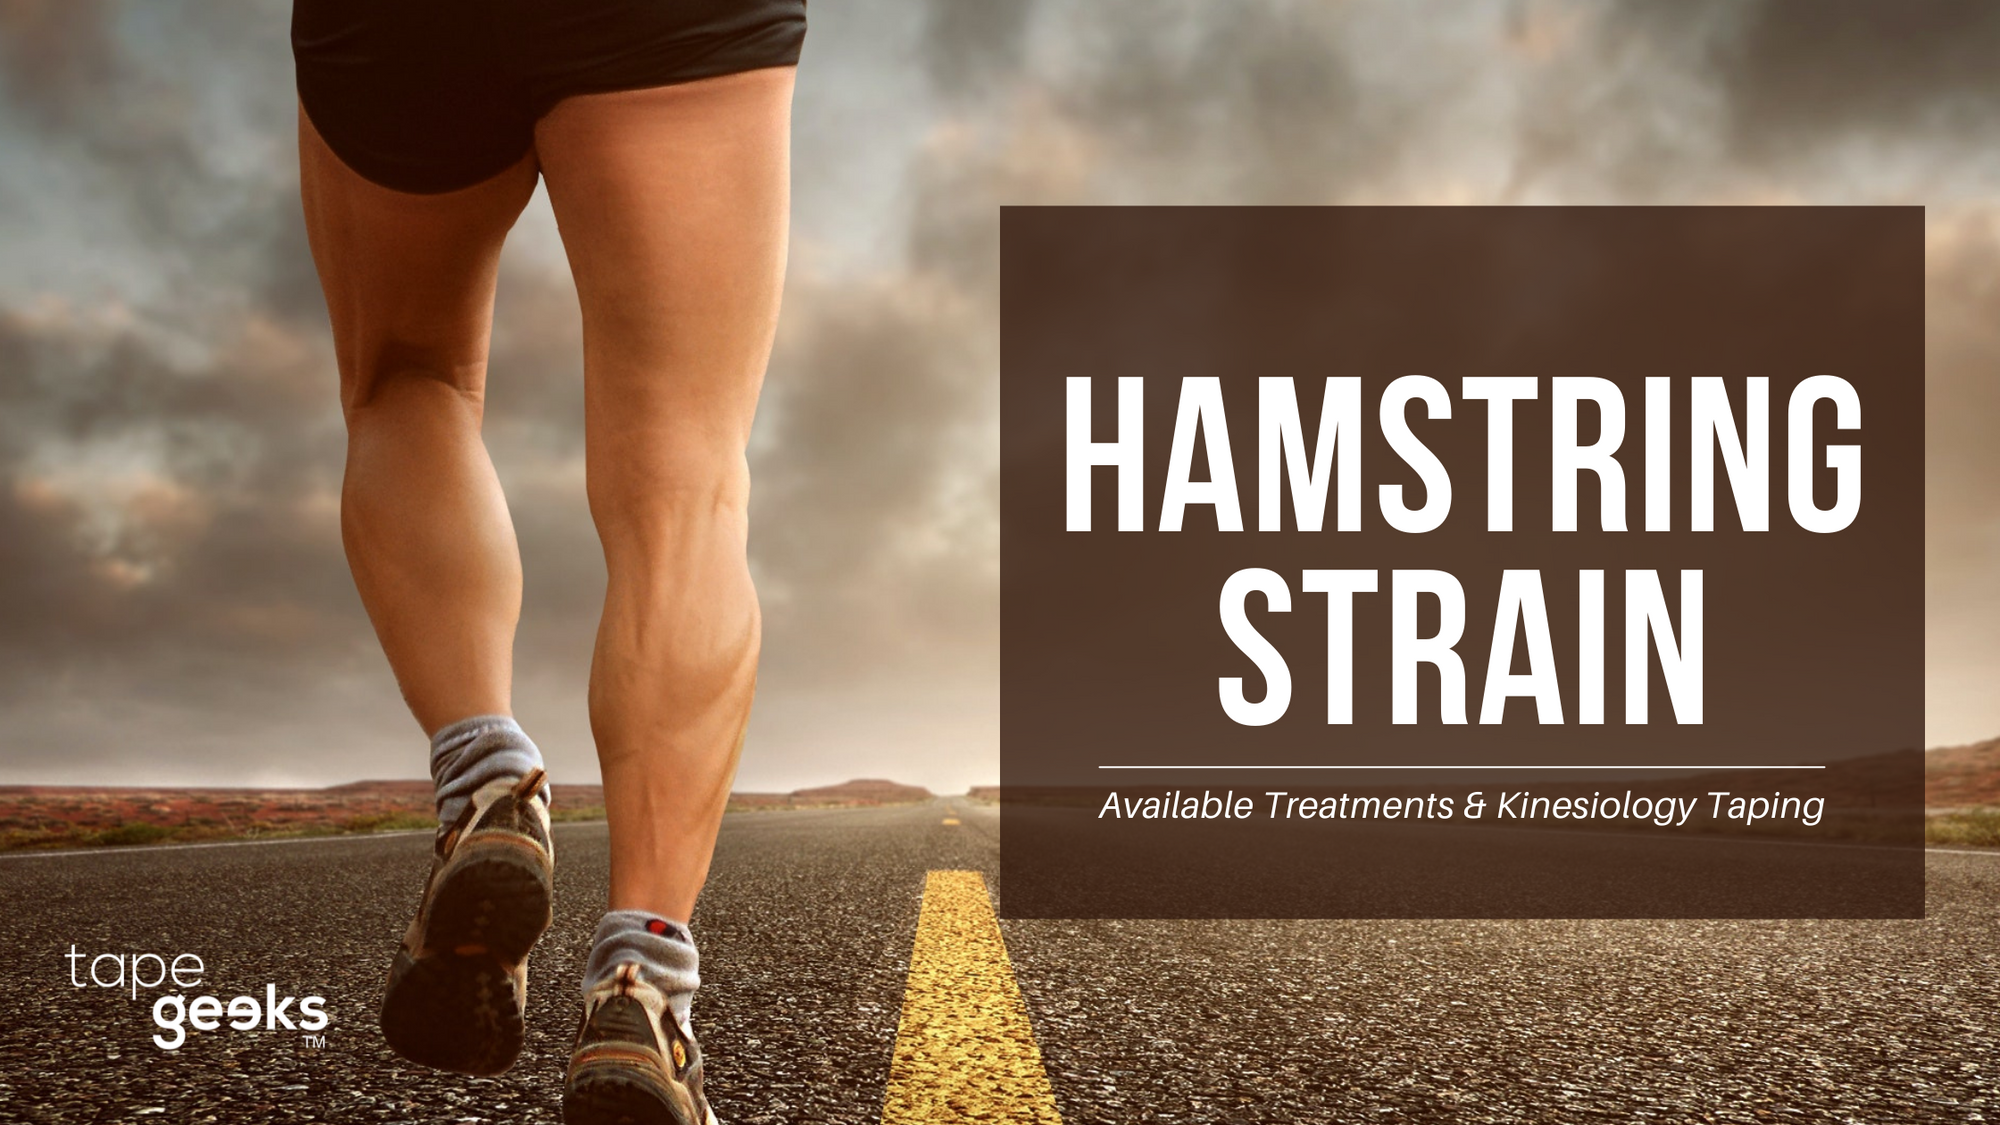 How to use kinesiology tape for hamstring strain